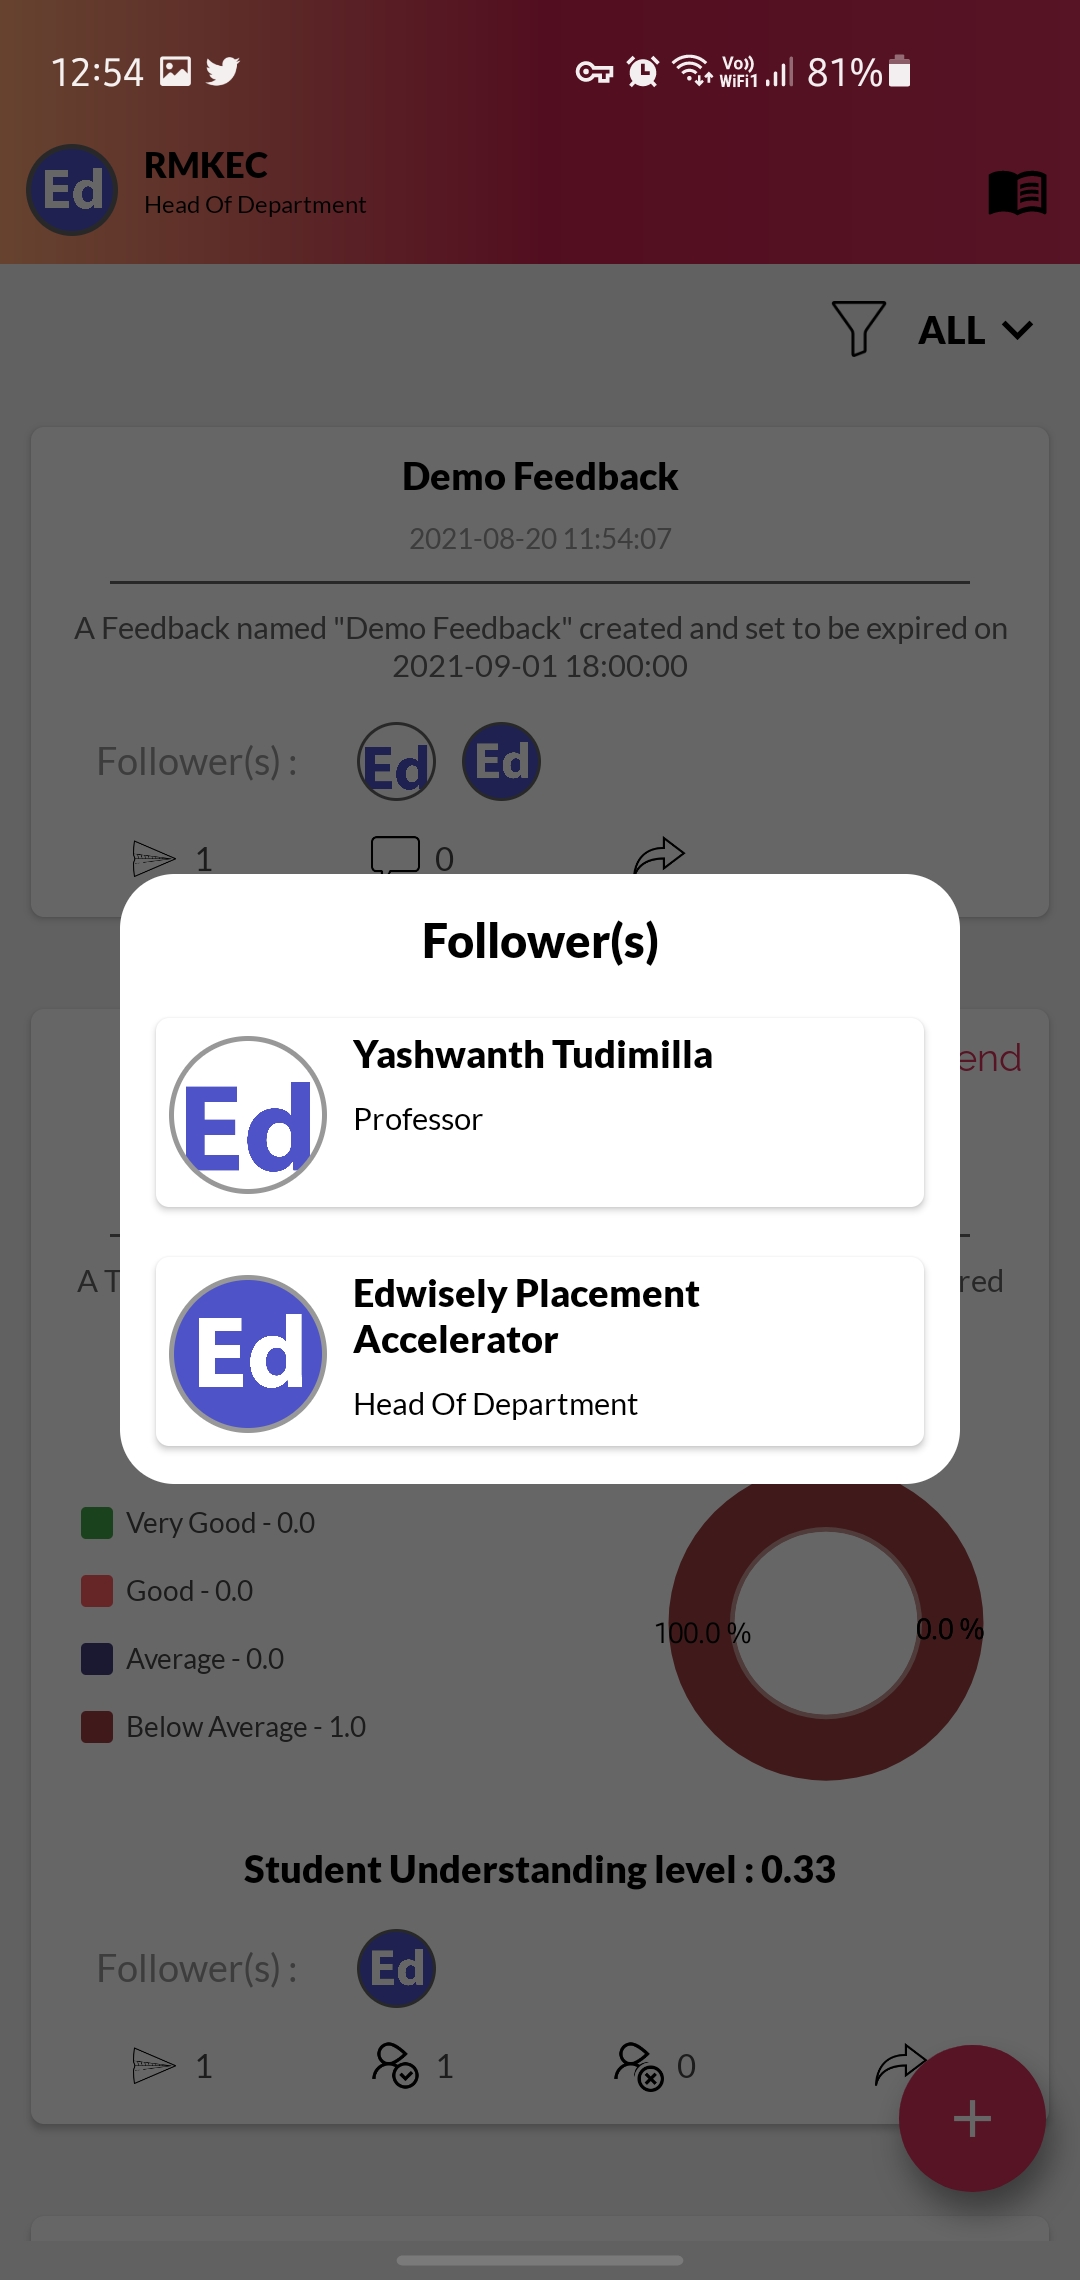 6. You can view the followers by tapping on “Followers” in the Feedback Card on the Dashboard.